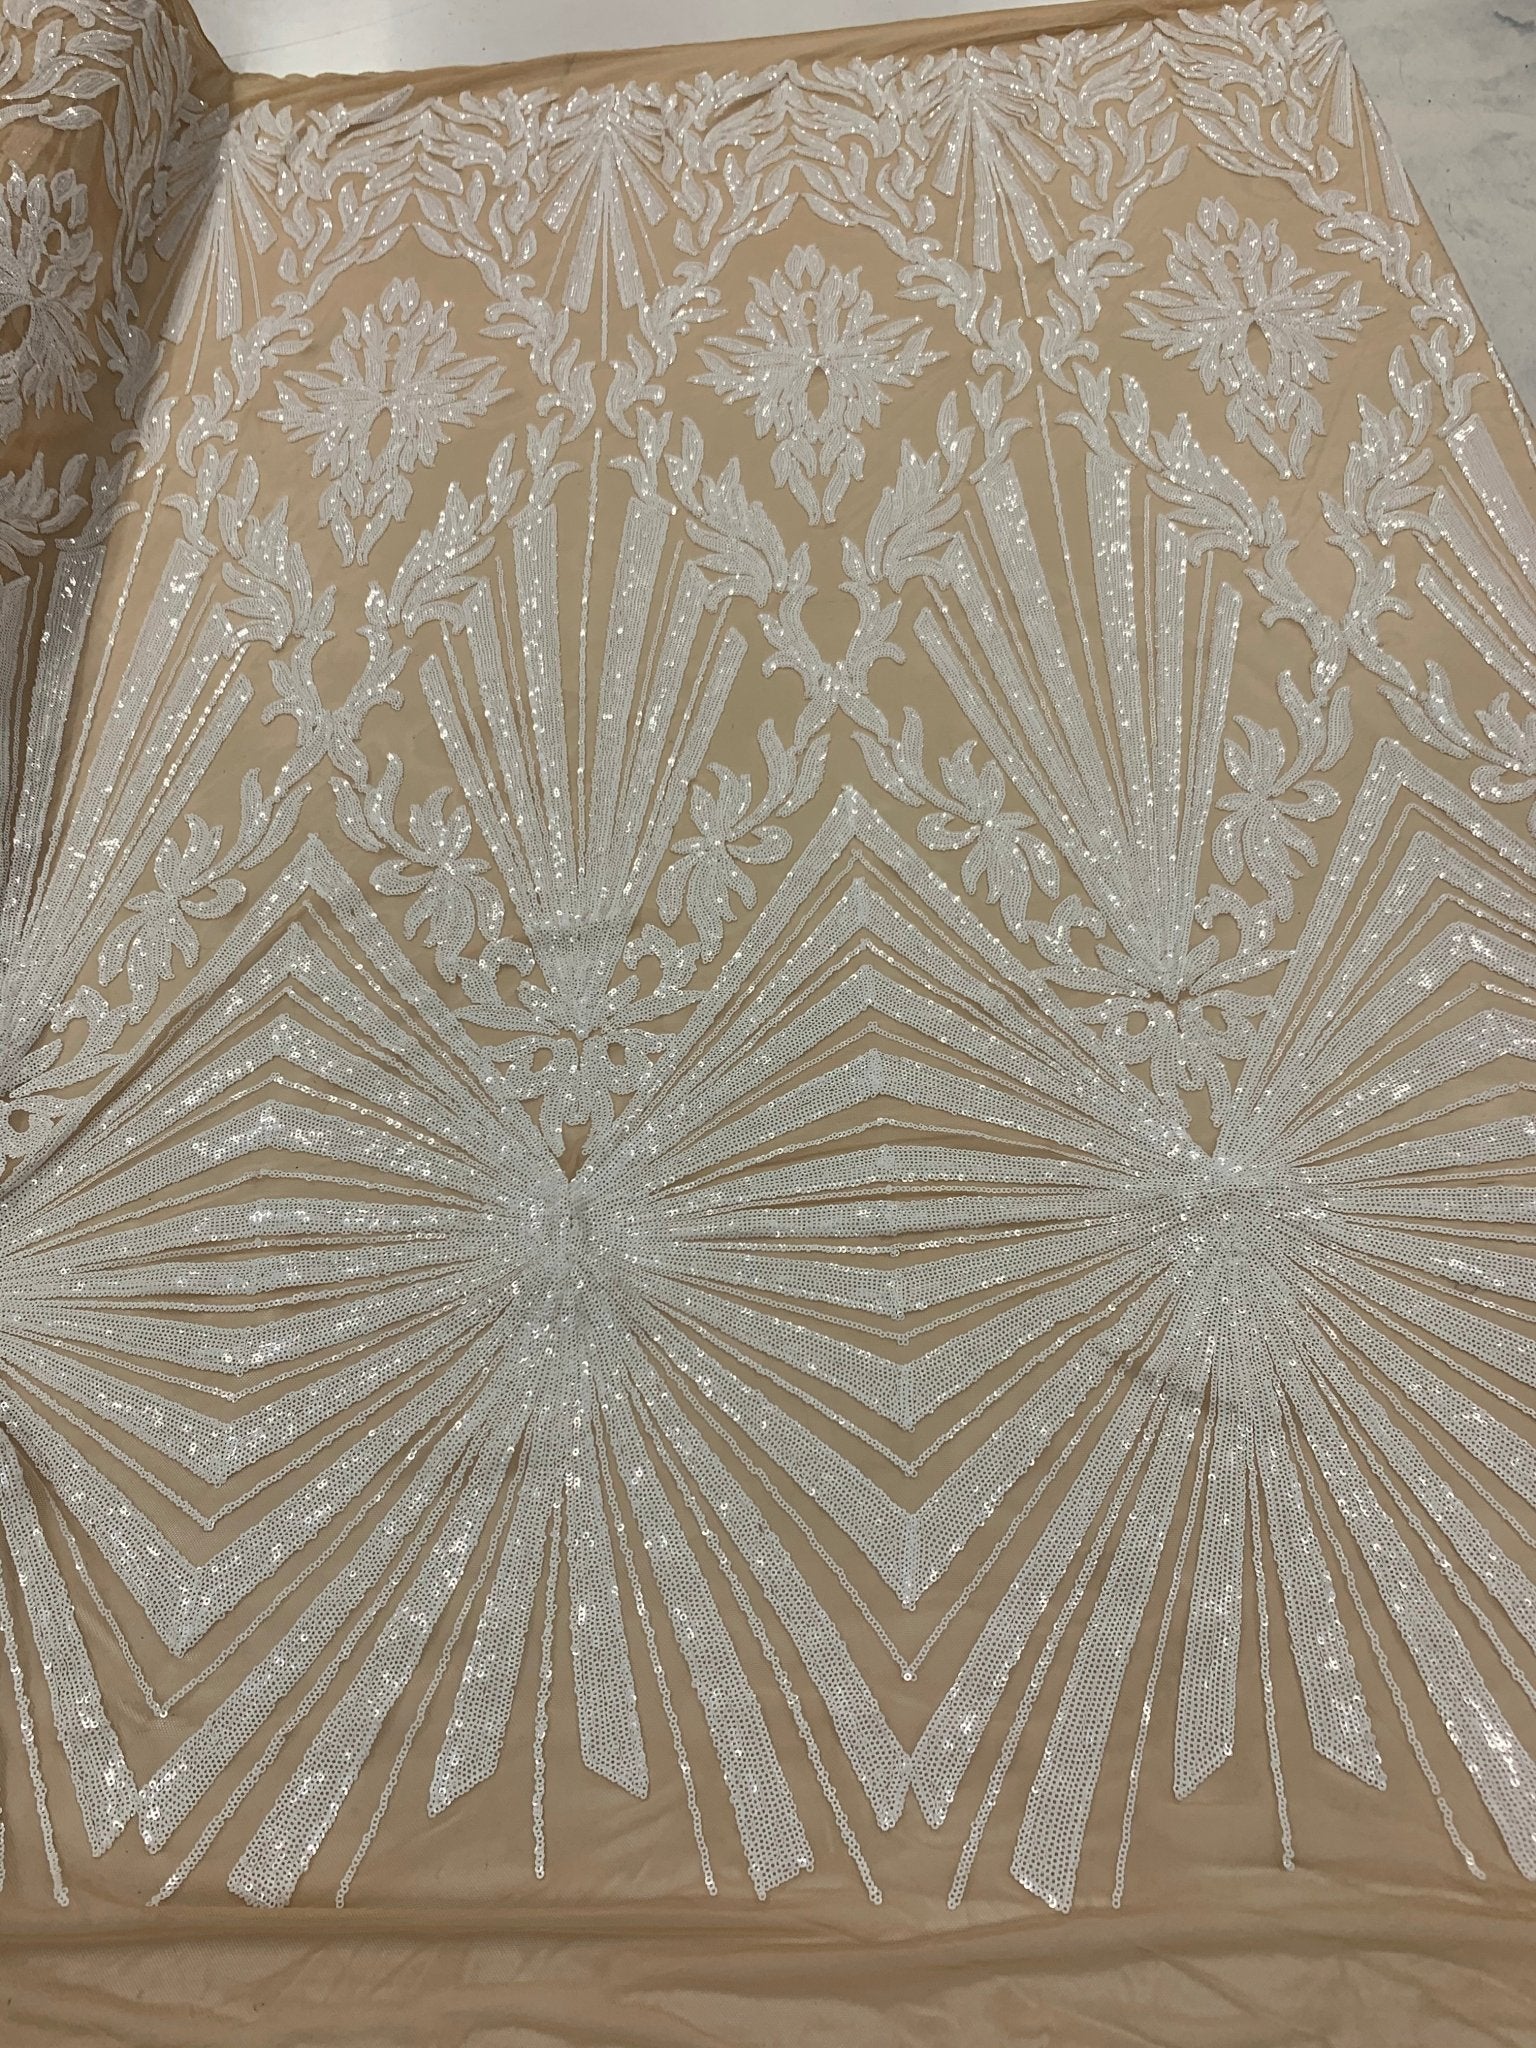 French Embroidery Stretch Sequins Fabric By The Yard on a Mesh LaceICEFABRICICE FABRICSWhite on Nude MeshFrench Embroidery Stretch Sequins Fabric By The Yard on a Mesh Lace ICEFABRIC White on Nude Mesh